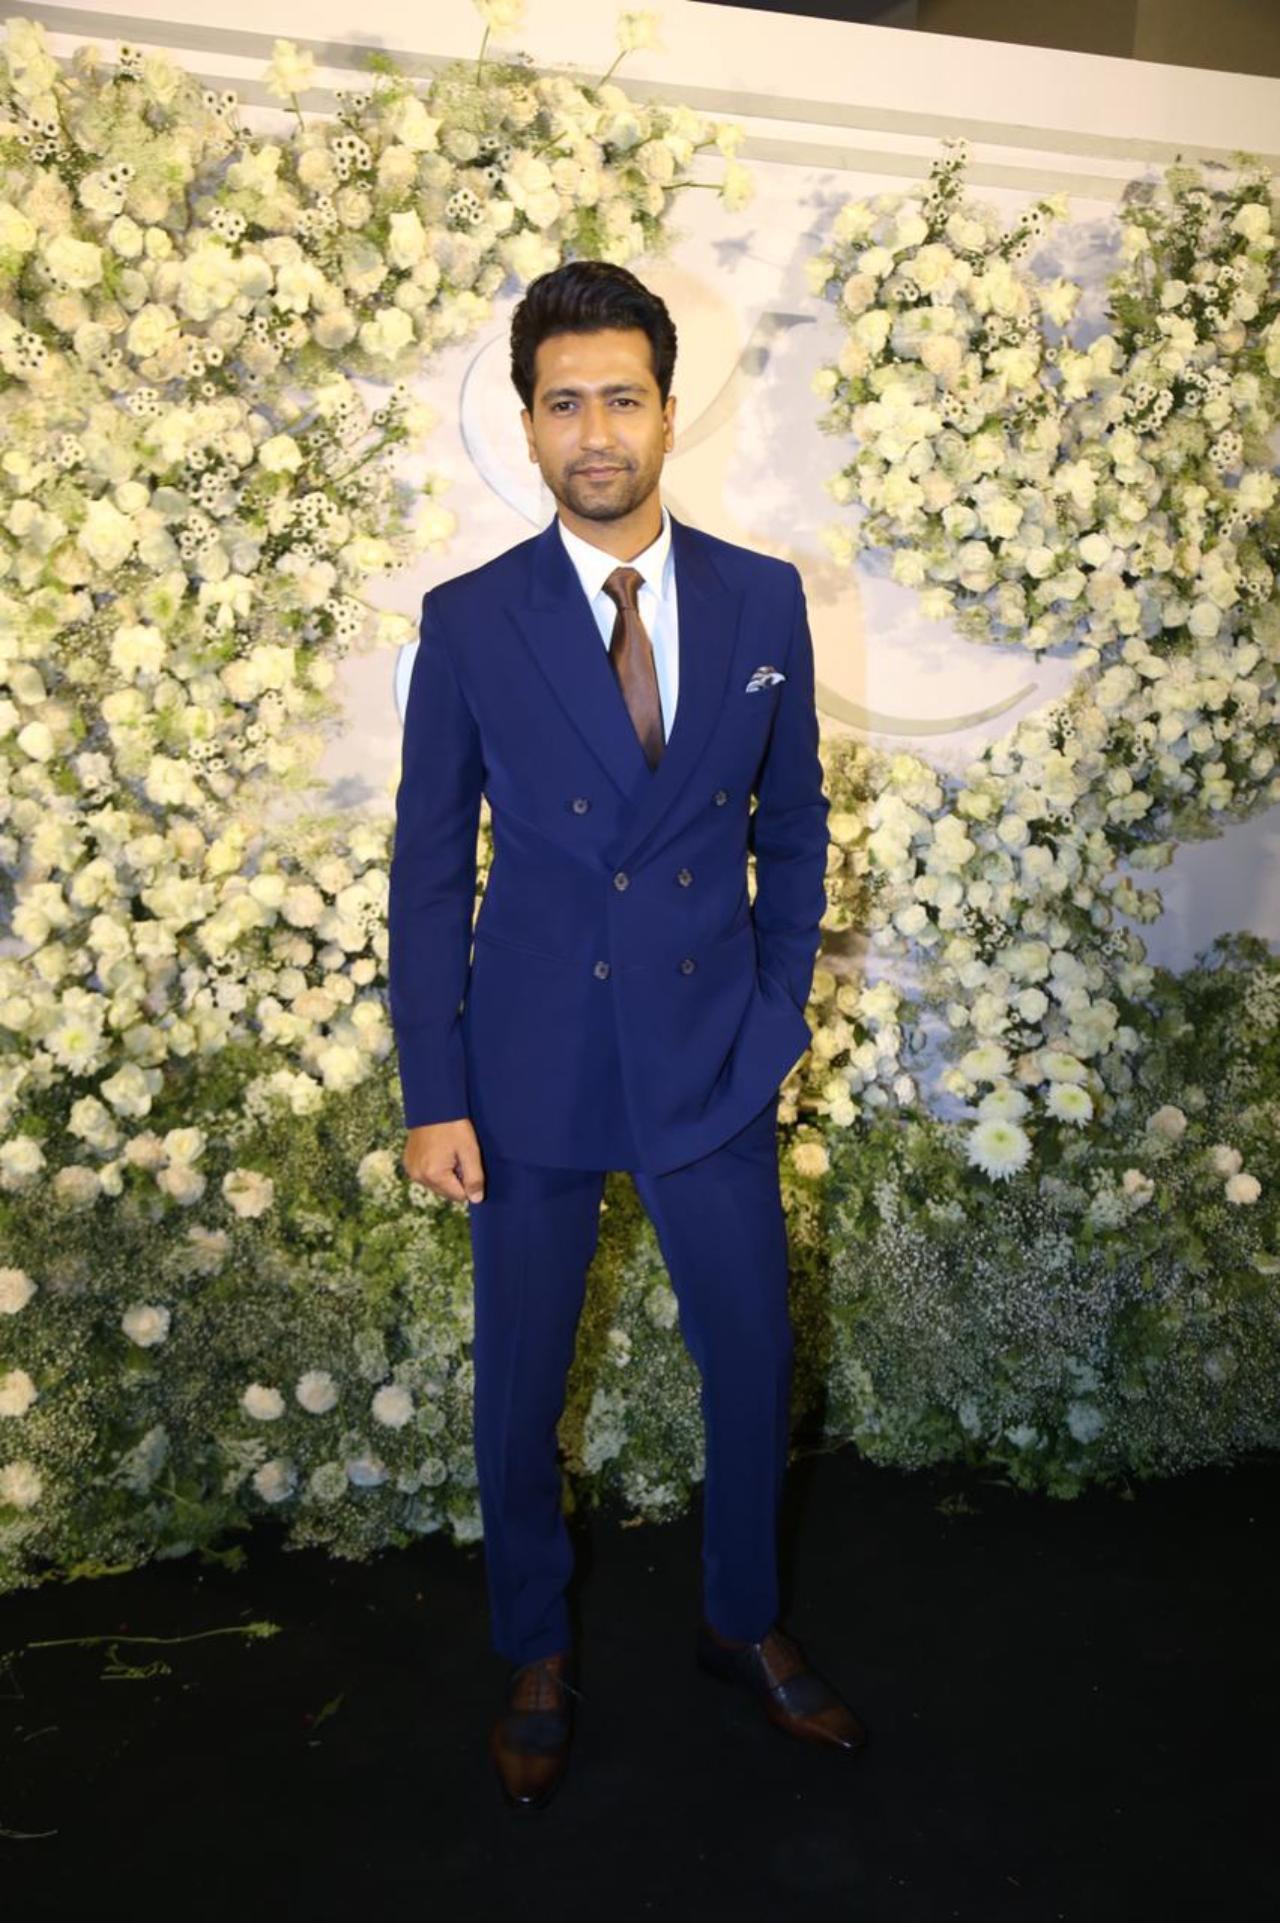 Vicky Kaushal looked smart in a blue suit. He arrived solo for the party